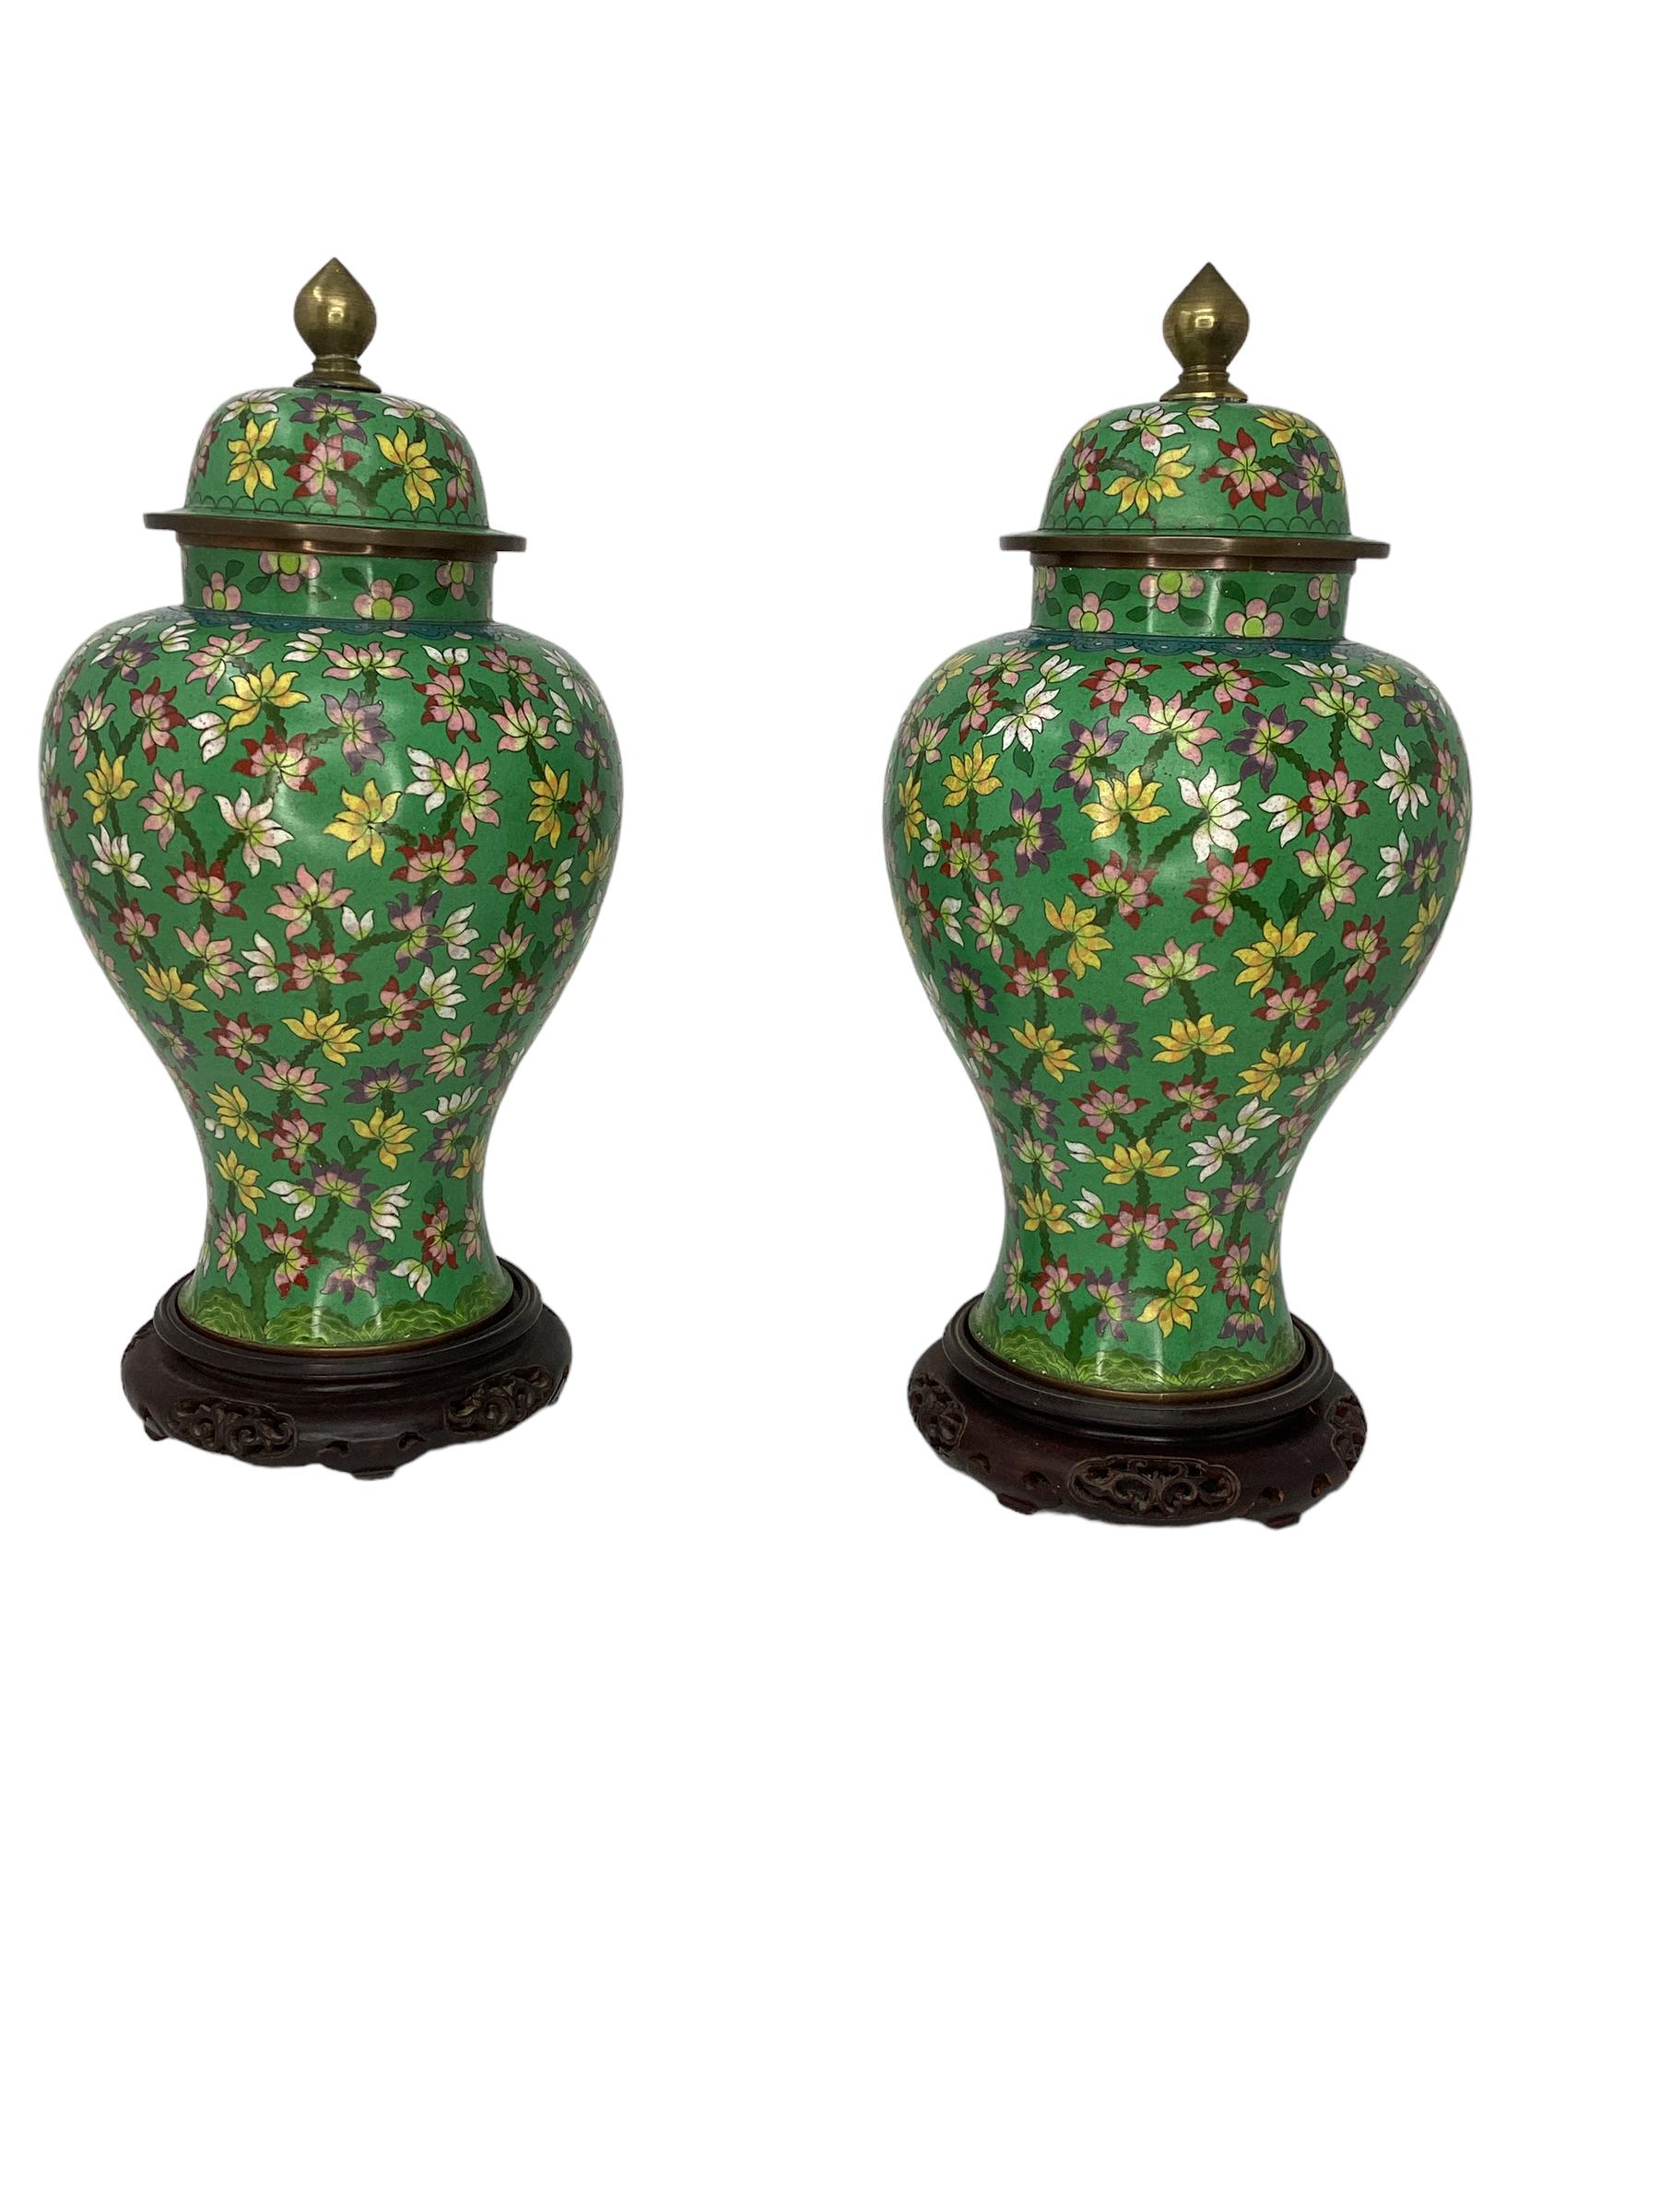 Pair of Antique Chinese Cloisonné Covered Ginger Jar Vases 7